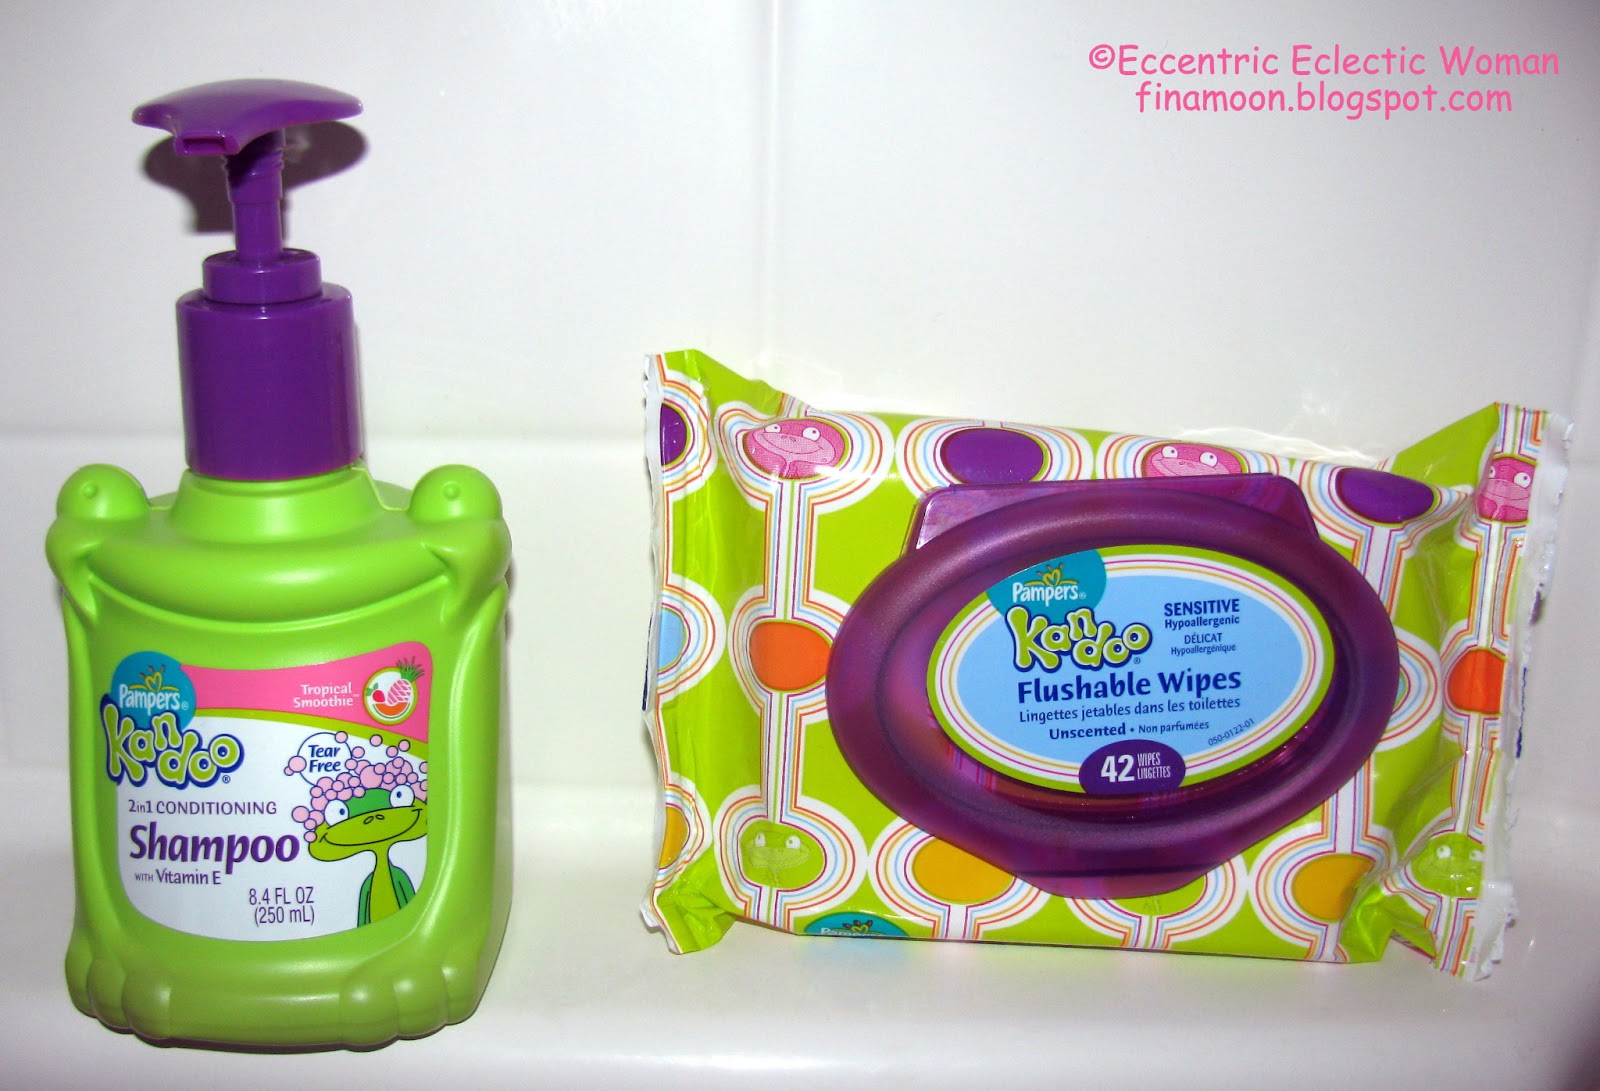 Eccentric Eclectic Woman: Pampers Kandoo Shampoo and Wipes Review